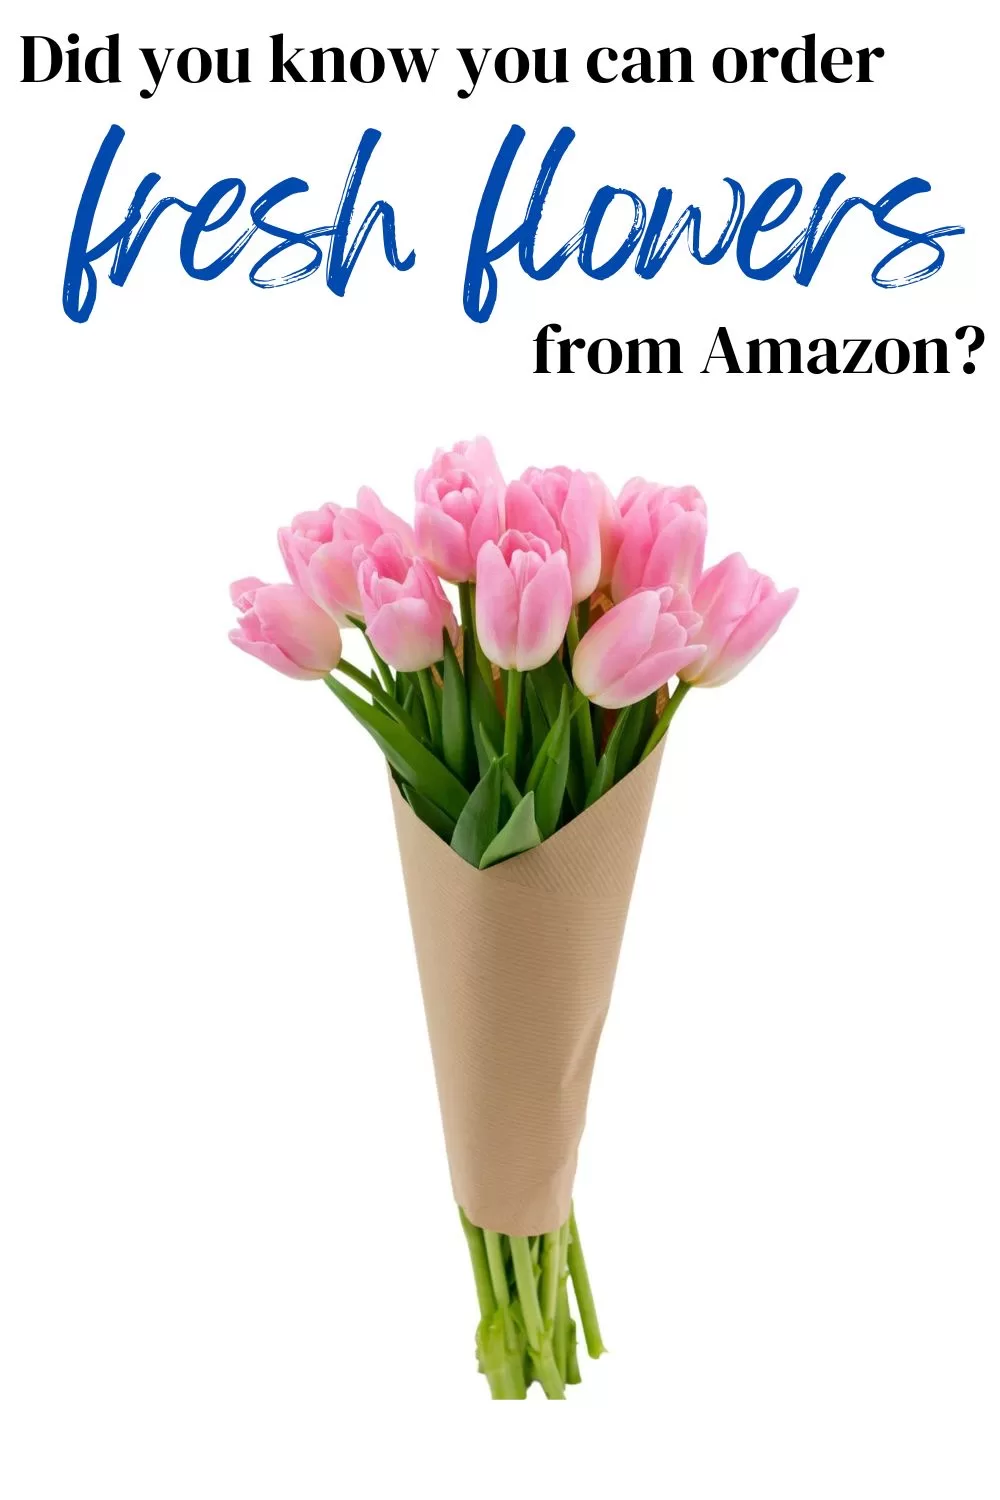 Order Flowers from Amazon Prime